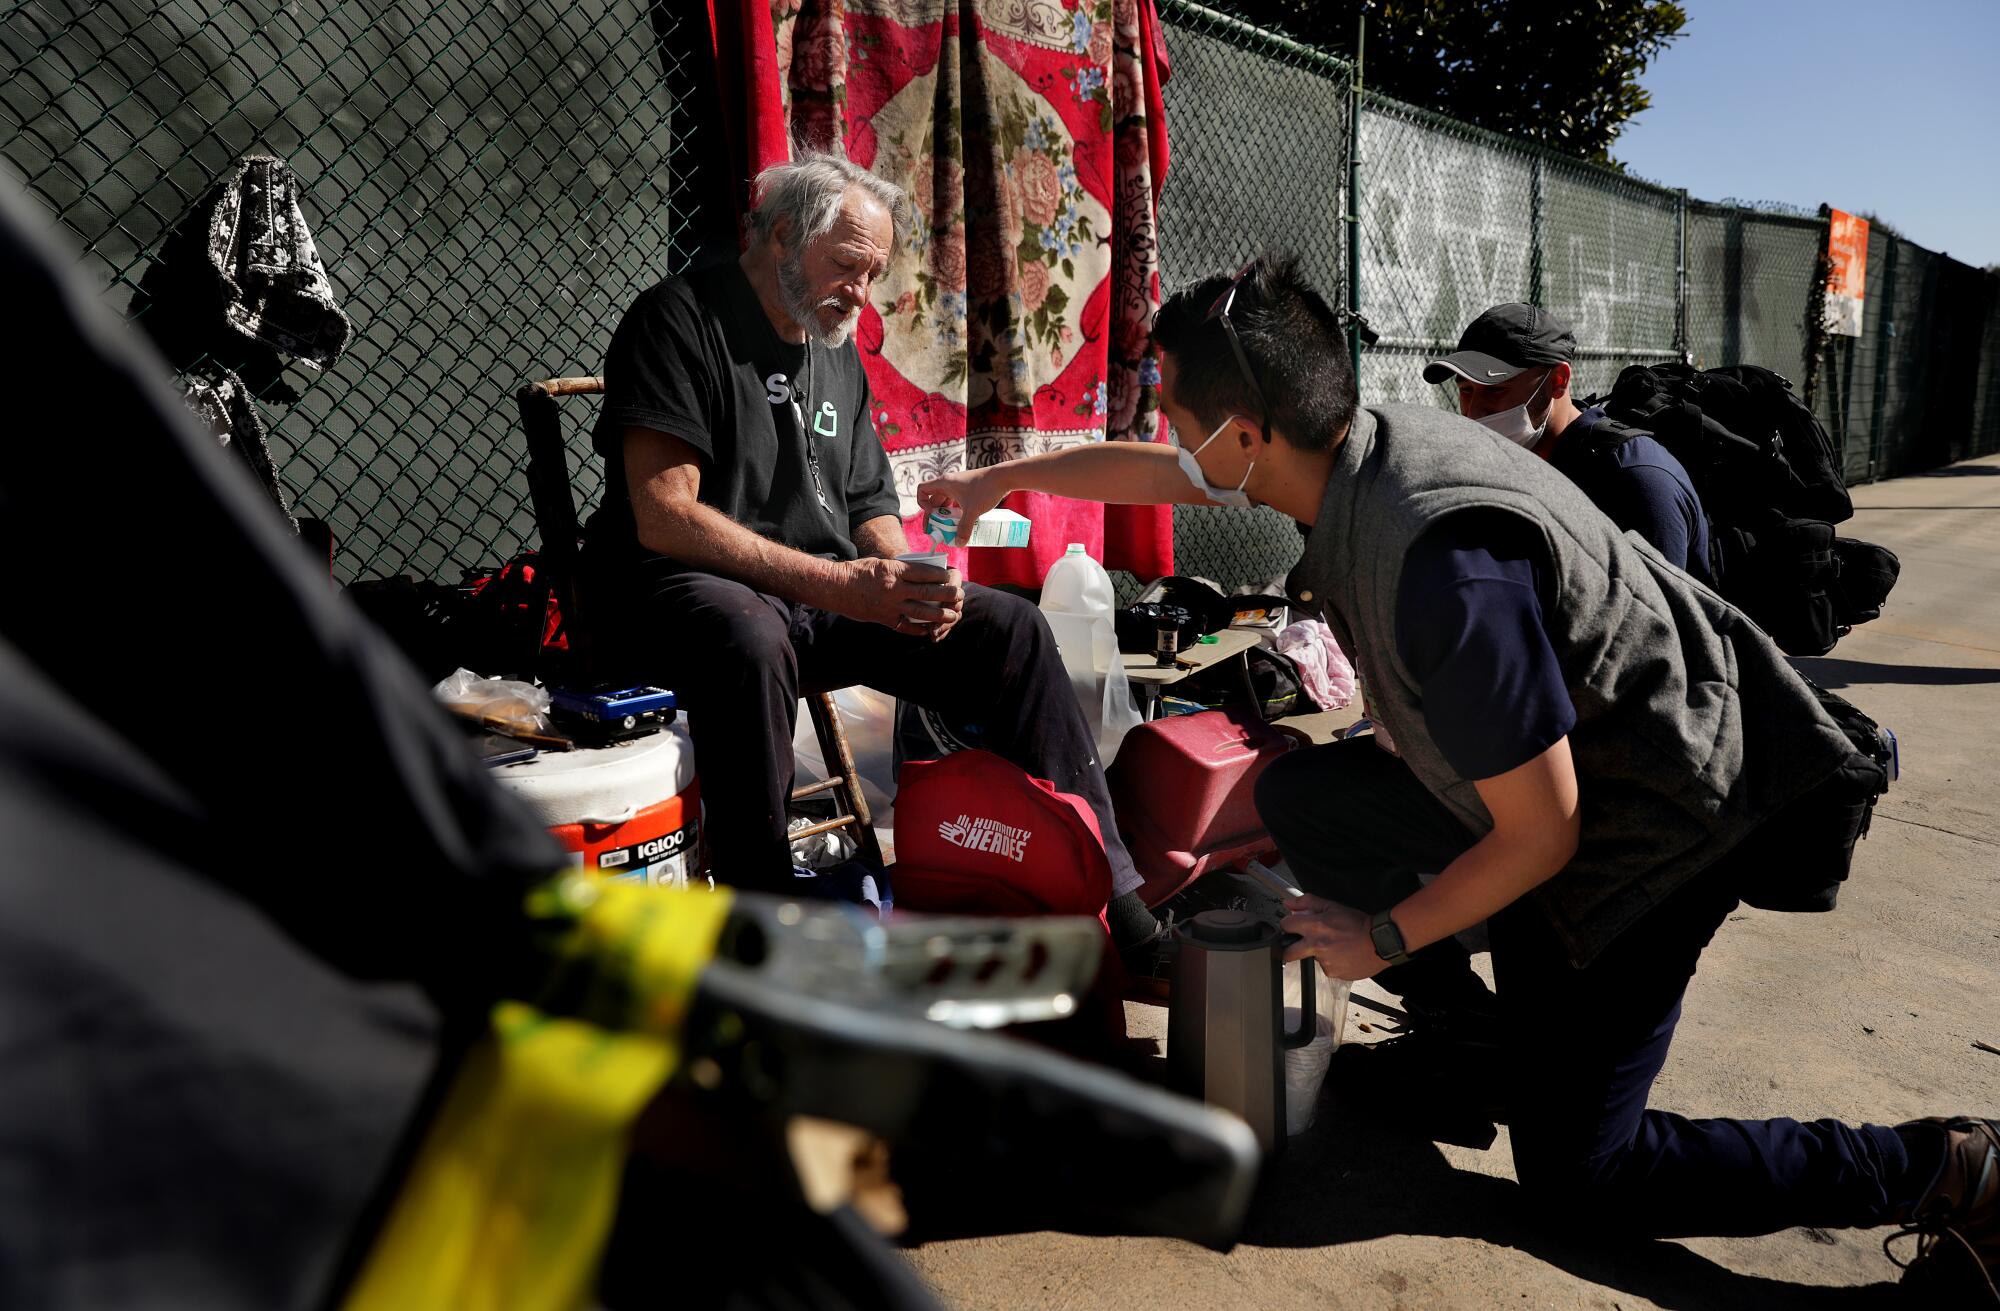 EMT Christopher Phan makes a cup of coffee for Terry Mason Kendrick as the medical team visits Van Nuys on March 7, 2022.